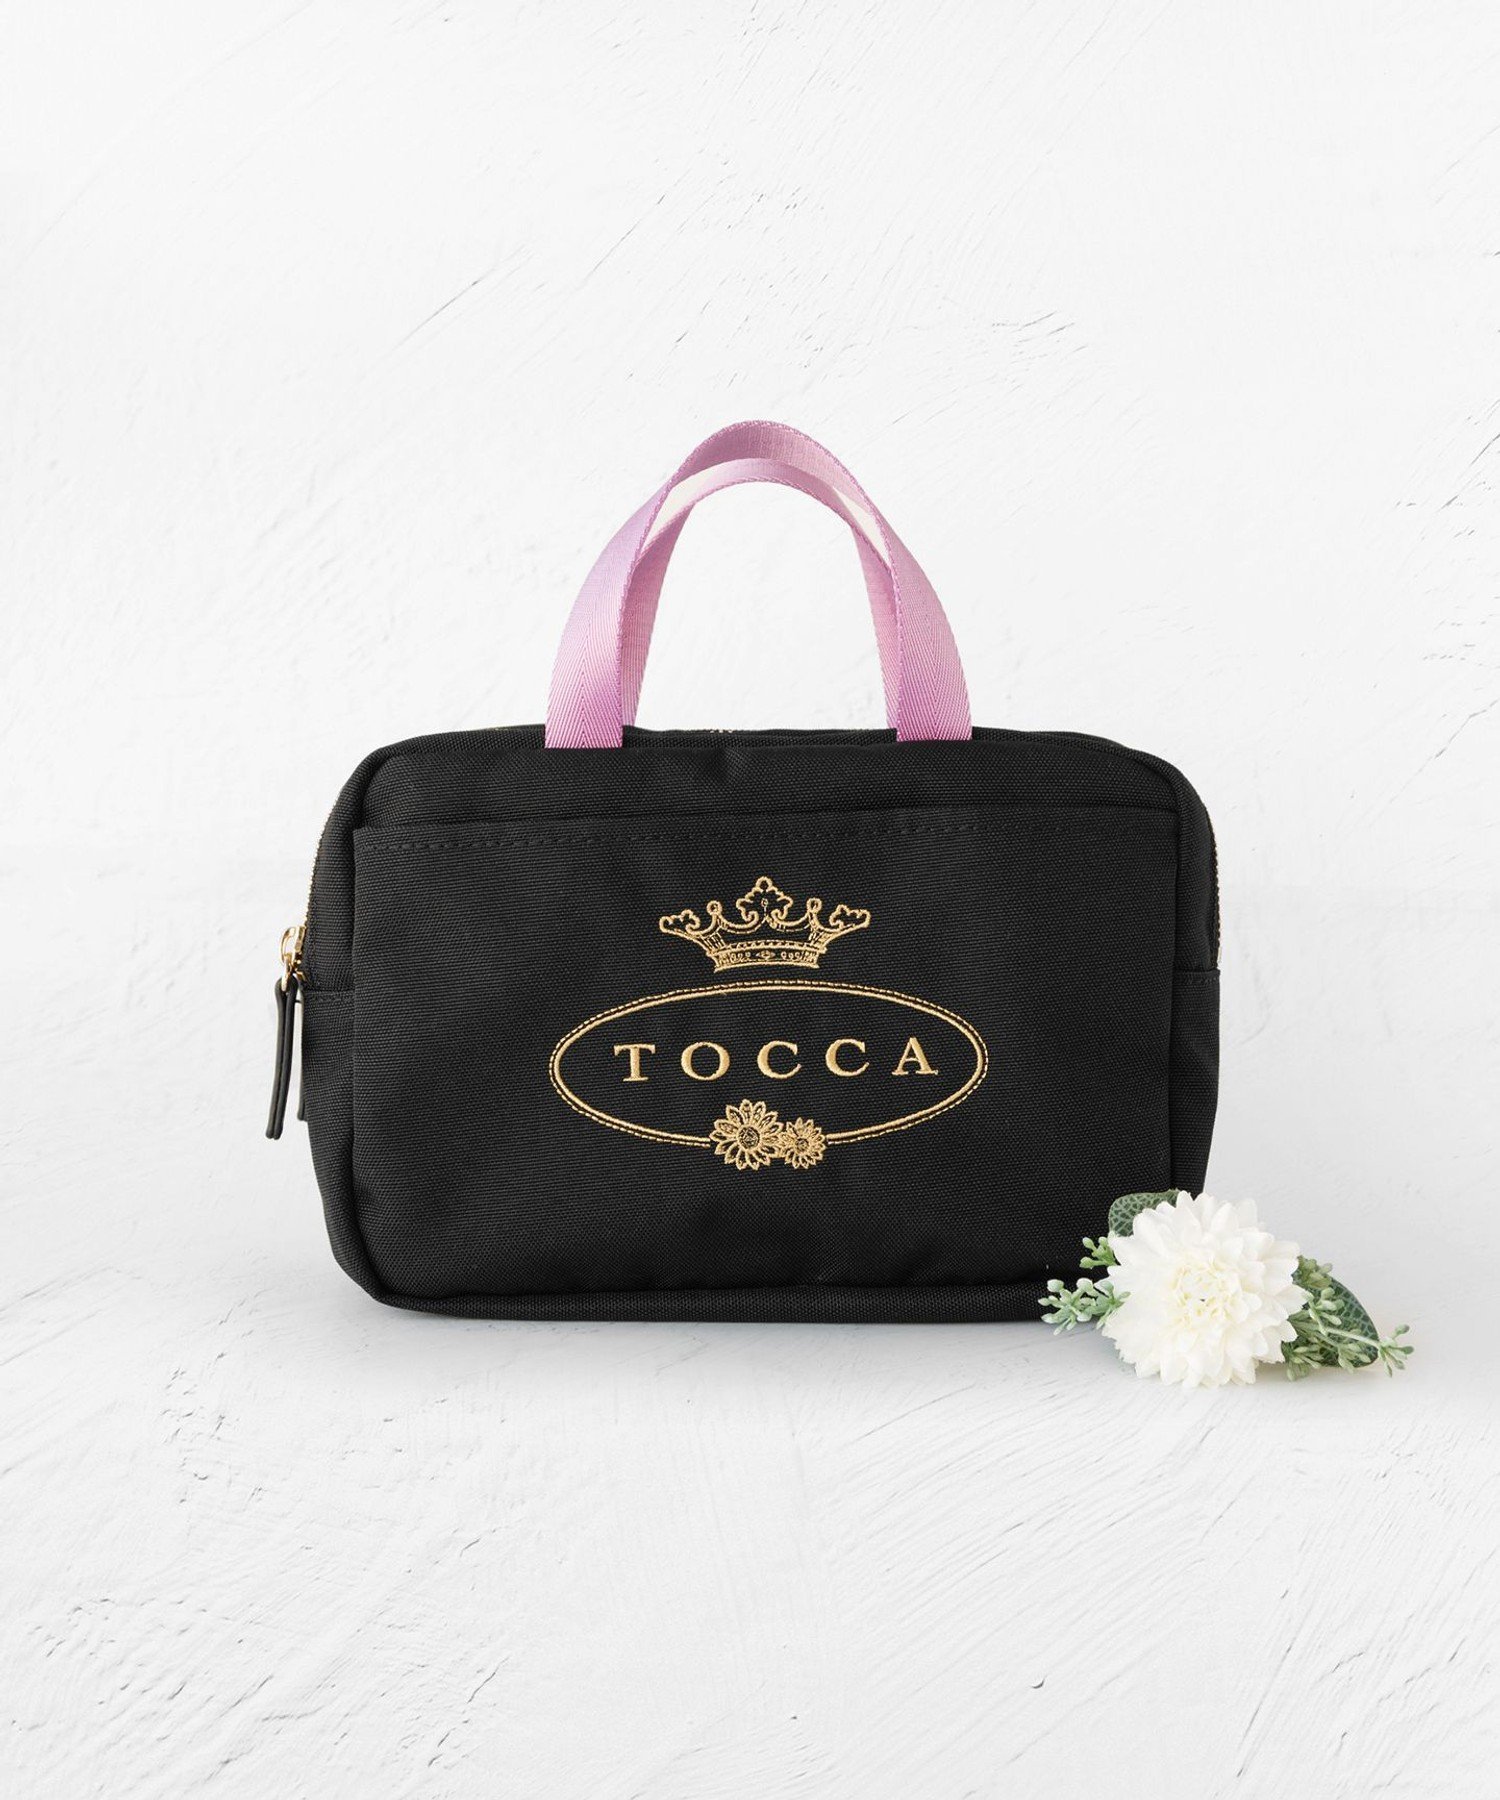 TOCCA TOCCA LOGO POUCH BAG ポーチ トッカ 財布 ポーチ ケース ポーチ ブラック ピンク カーキ【送料無料】